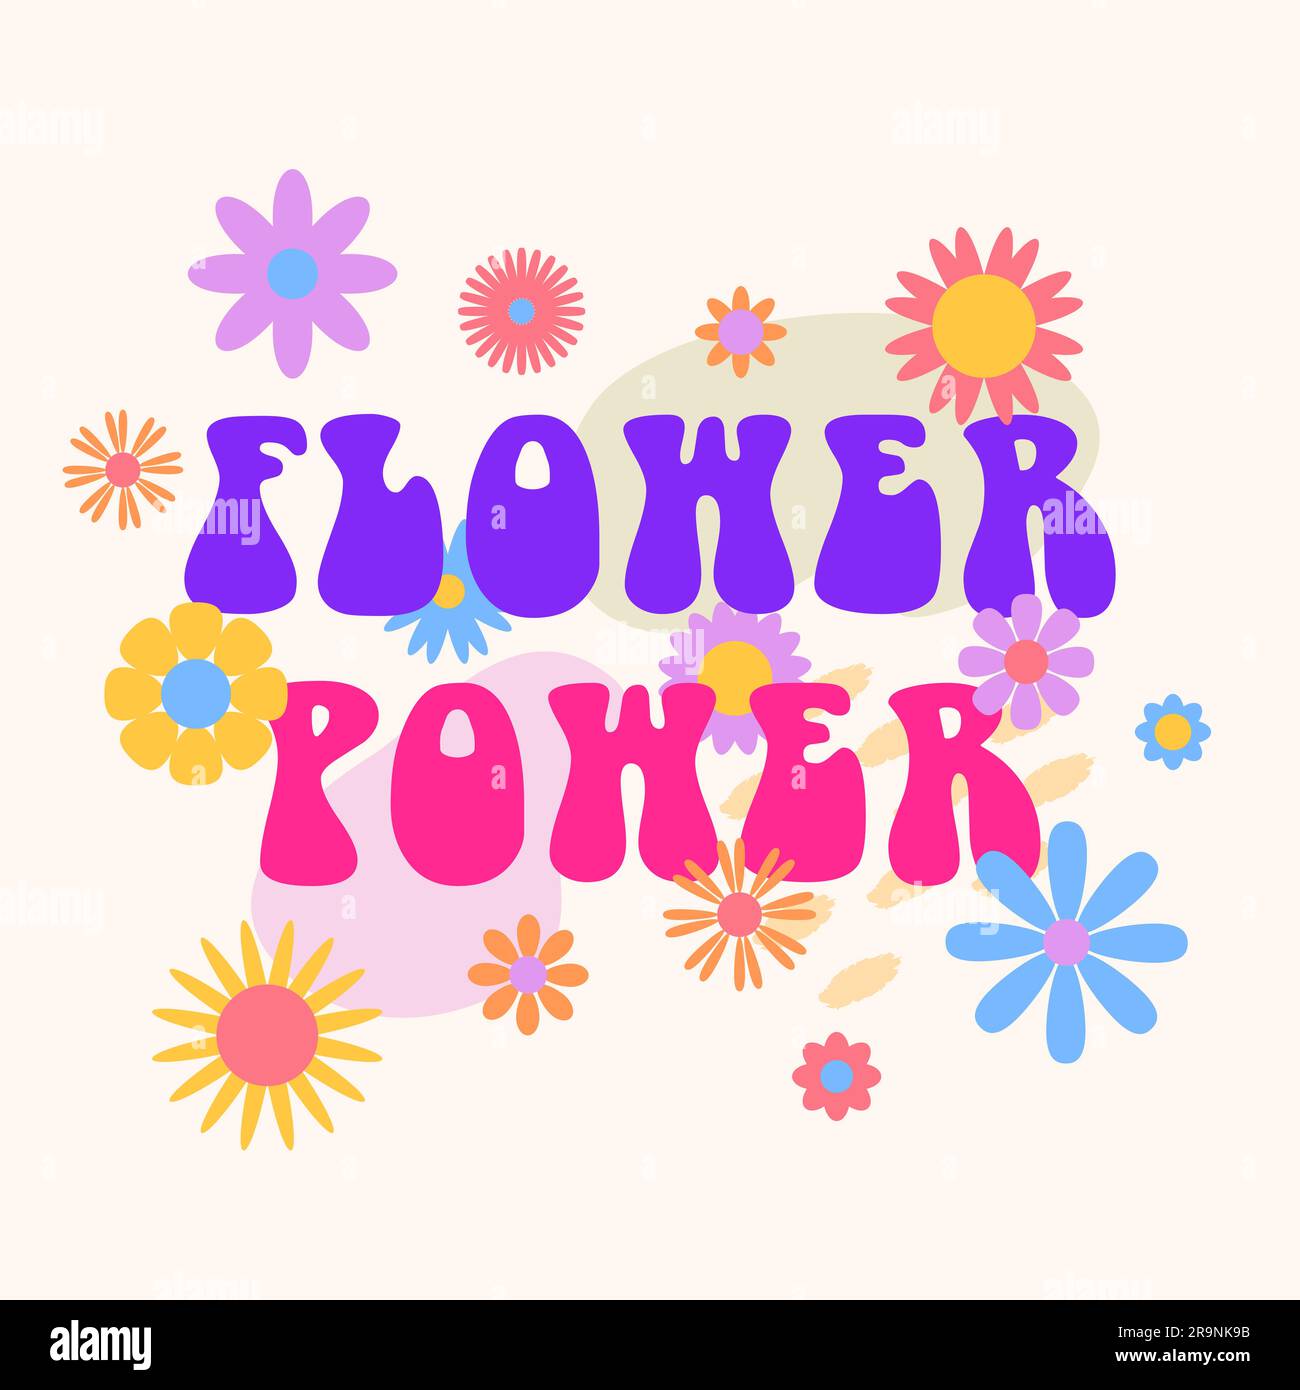 Vector trendy funny abstract retro 60s, 70s hippie groovy illustration Flower Power with flowers for fashion art print, poster or card Stock Vector